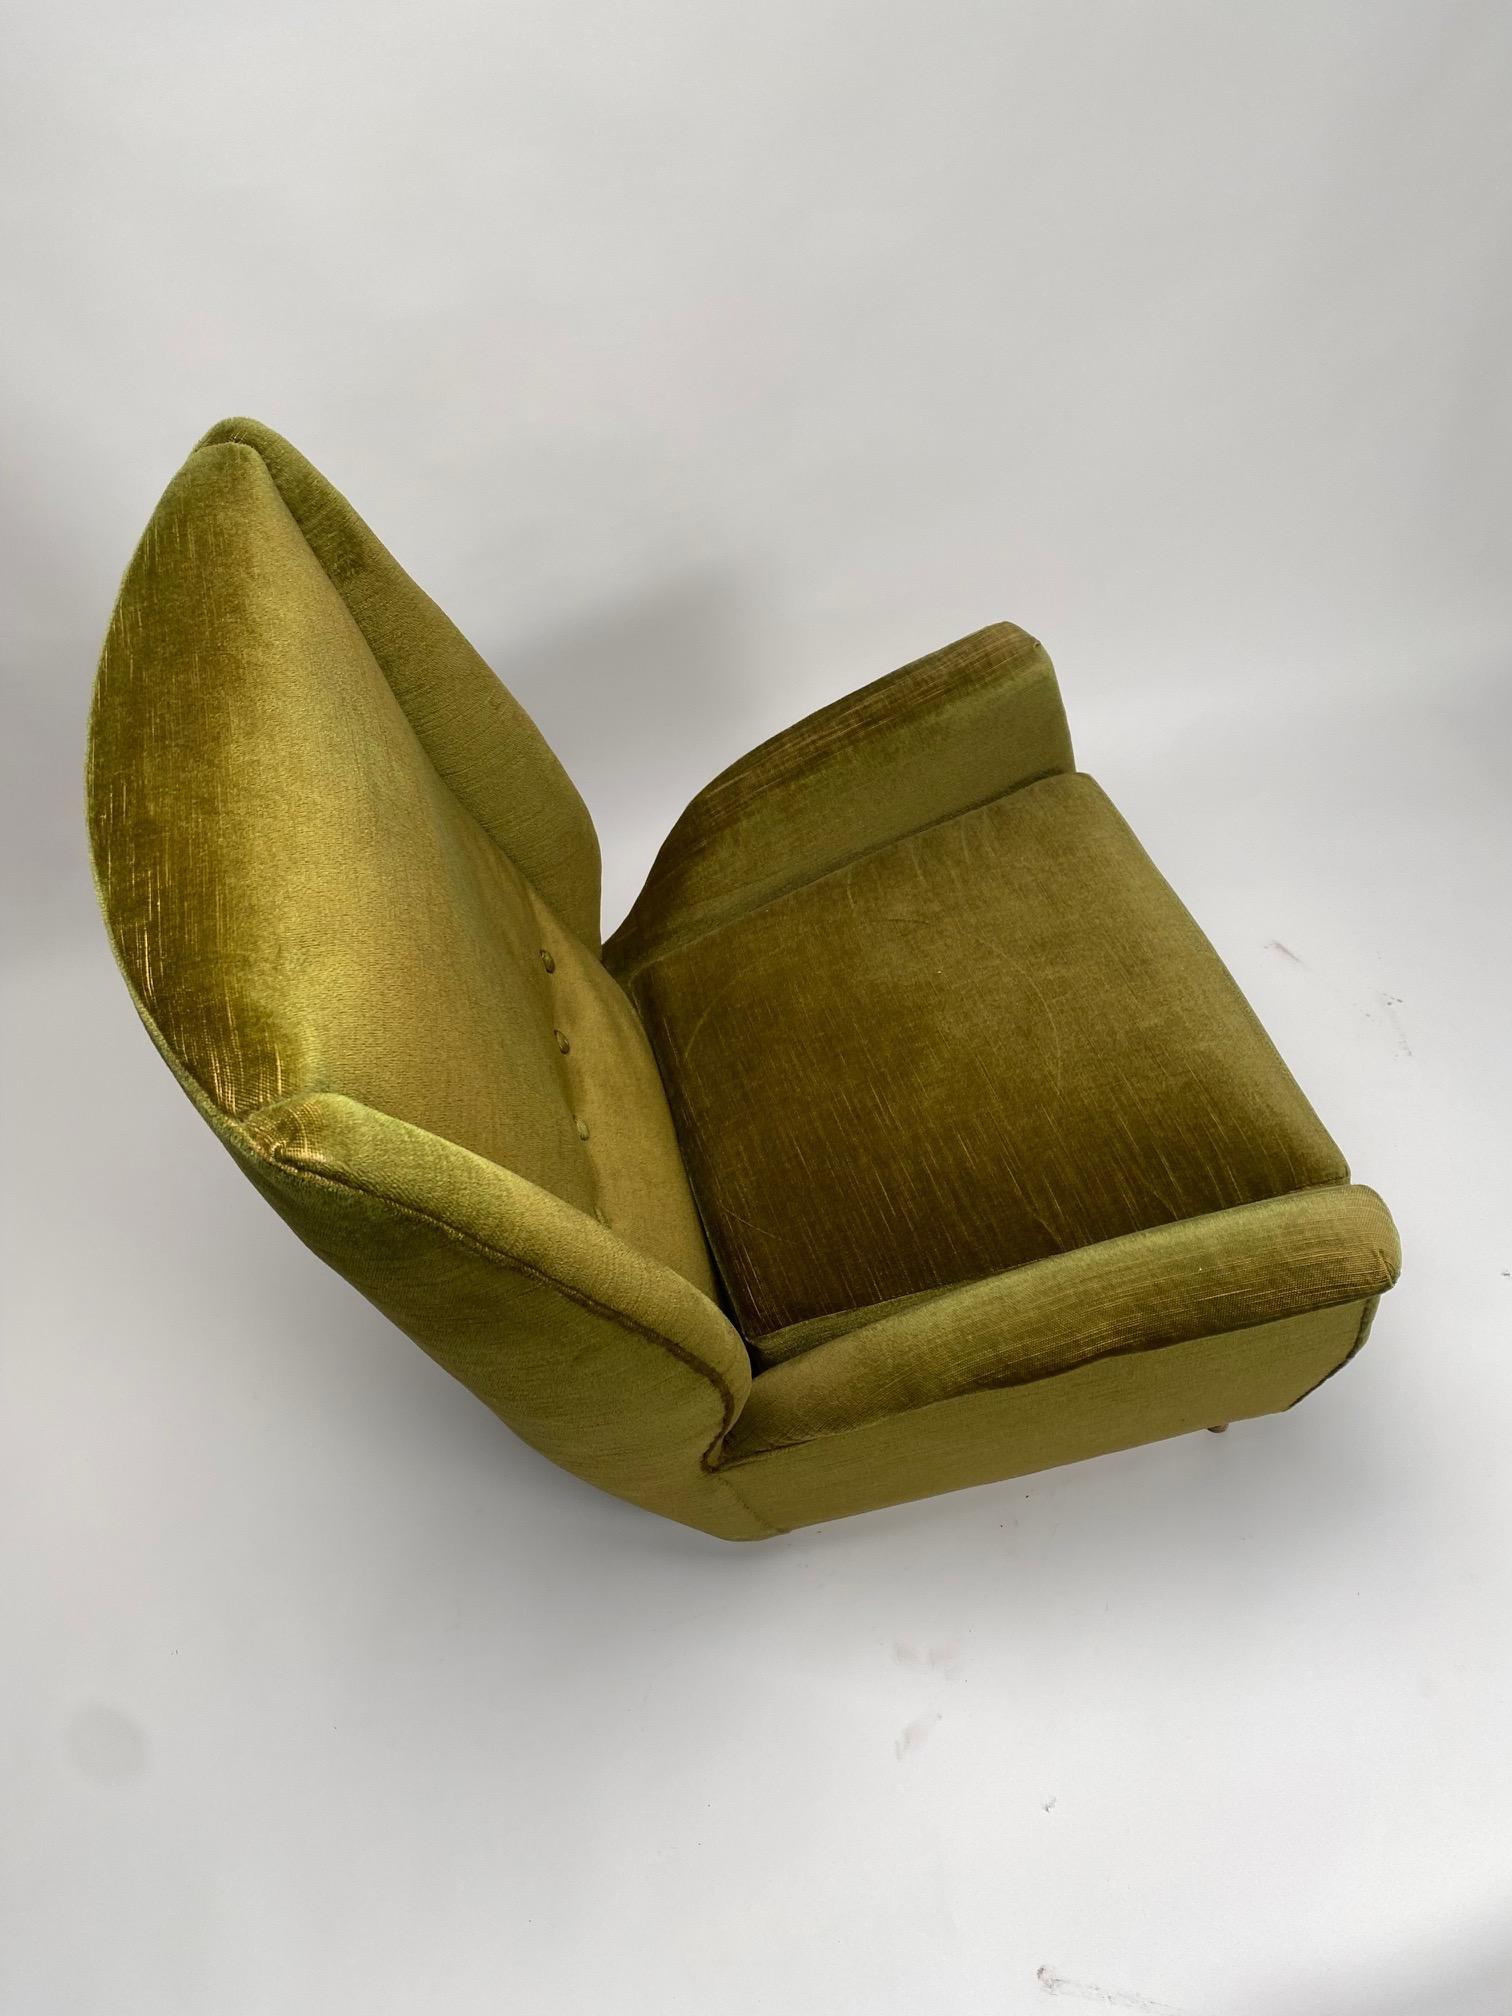 Wood Gio Ponti, rare pair of Wingback Armchairs for ISA, Italy, 1950s (customizable) For Sale